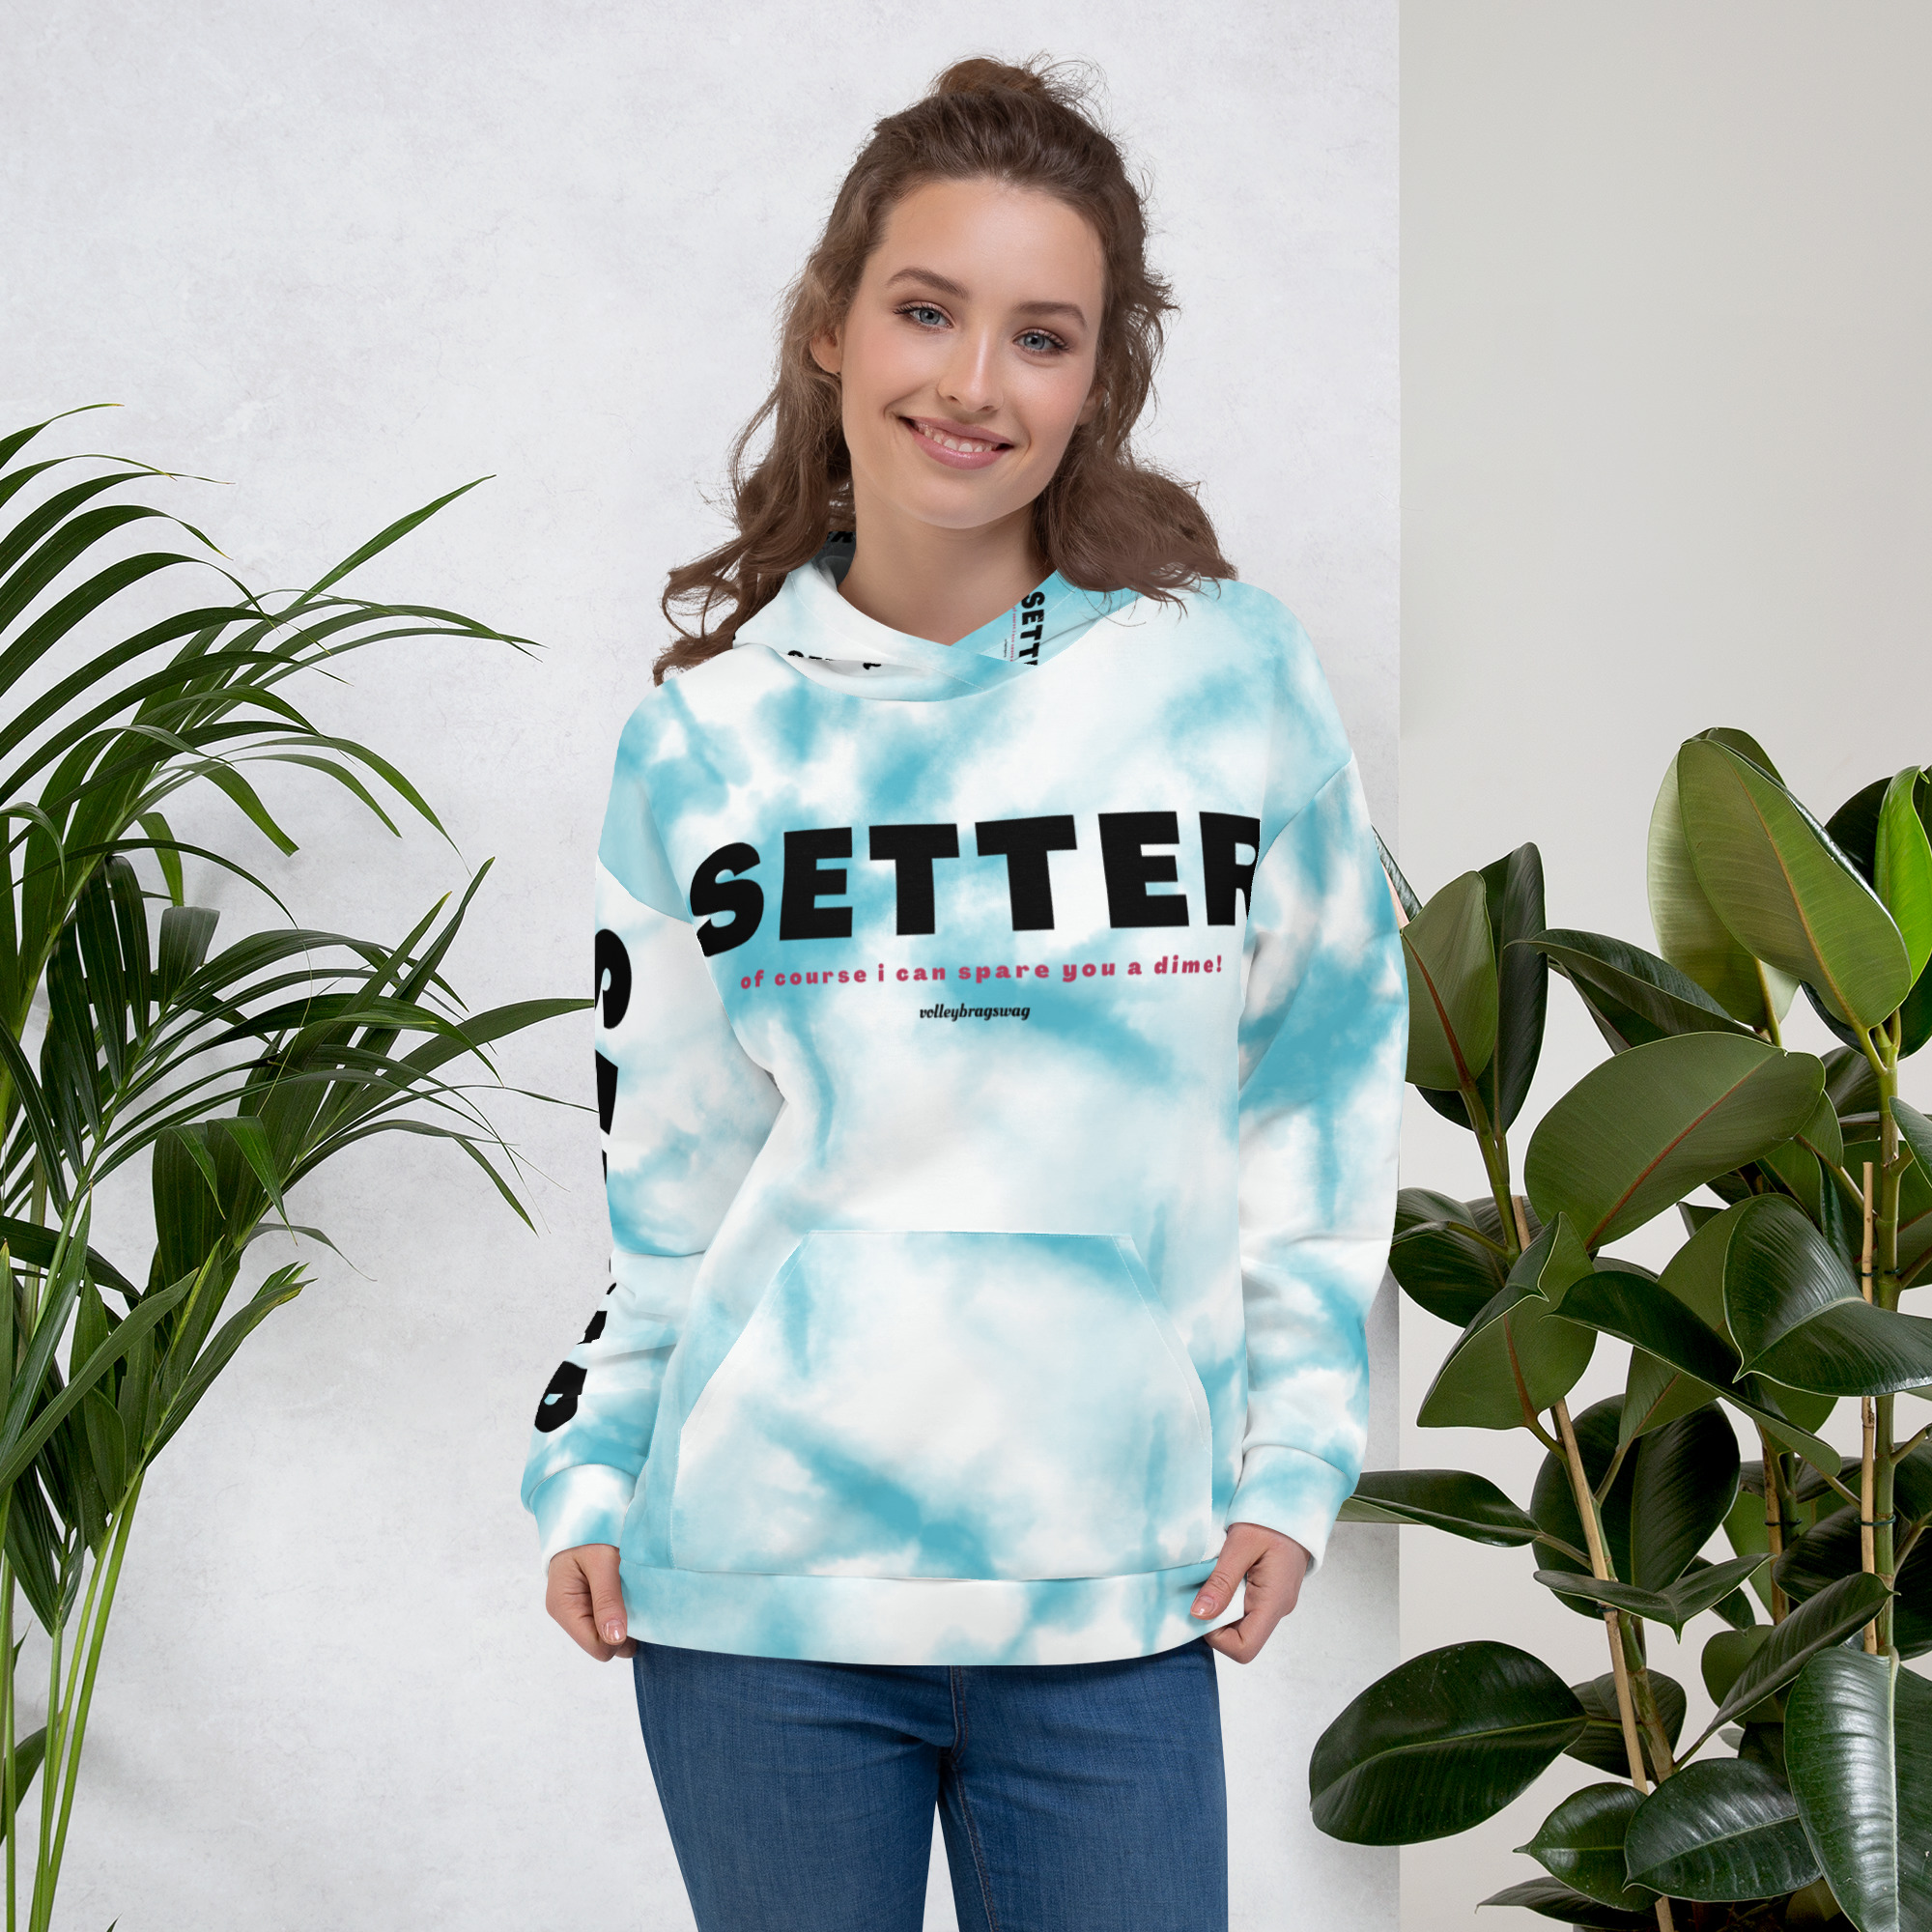 Blue and white tie dye hoodie Setter volleyball tshirt ideas. 

Girls Blue Tie Dye Hoodie, Volleyball Hand Signals For Setters, Tie Dye Hoodie, Blue Tie Dye Hoodie, Volleyball Team Hoodie Designs